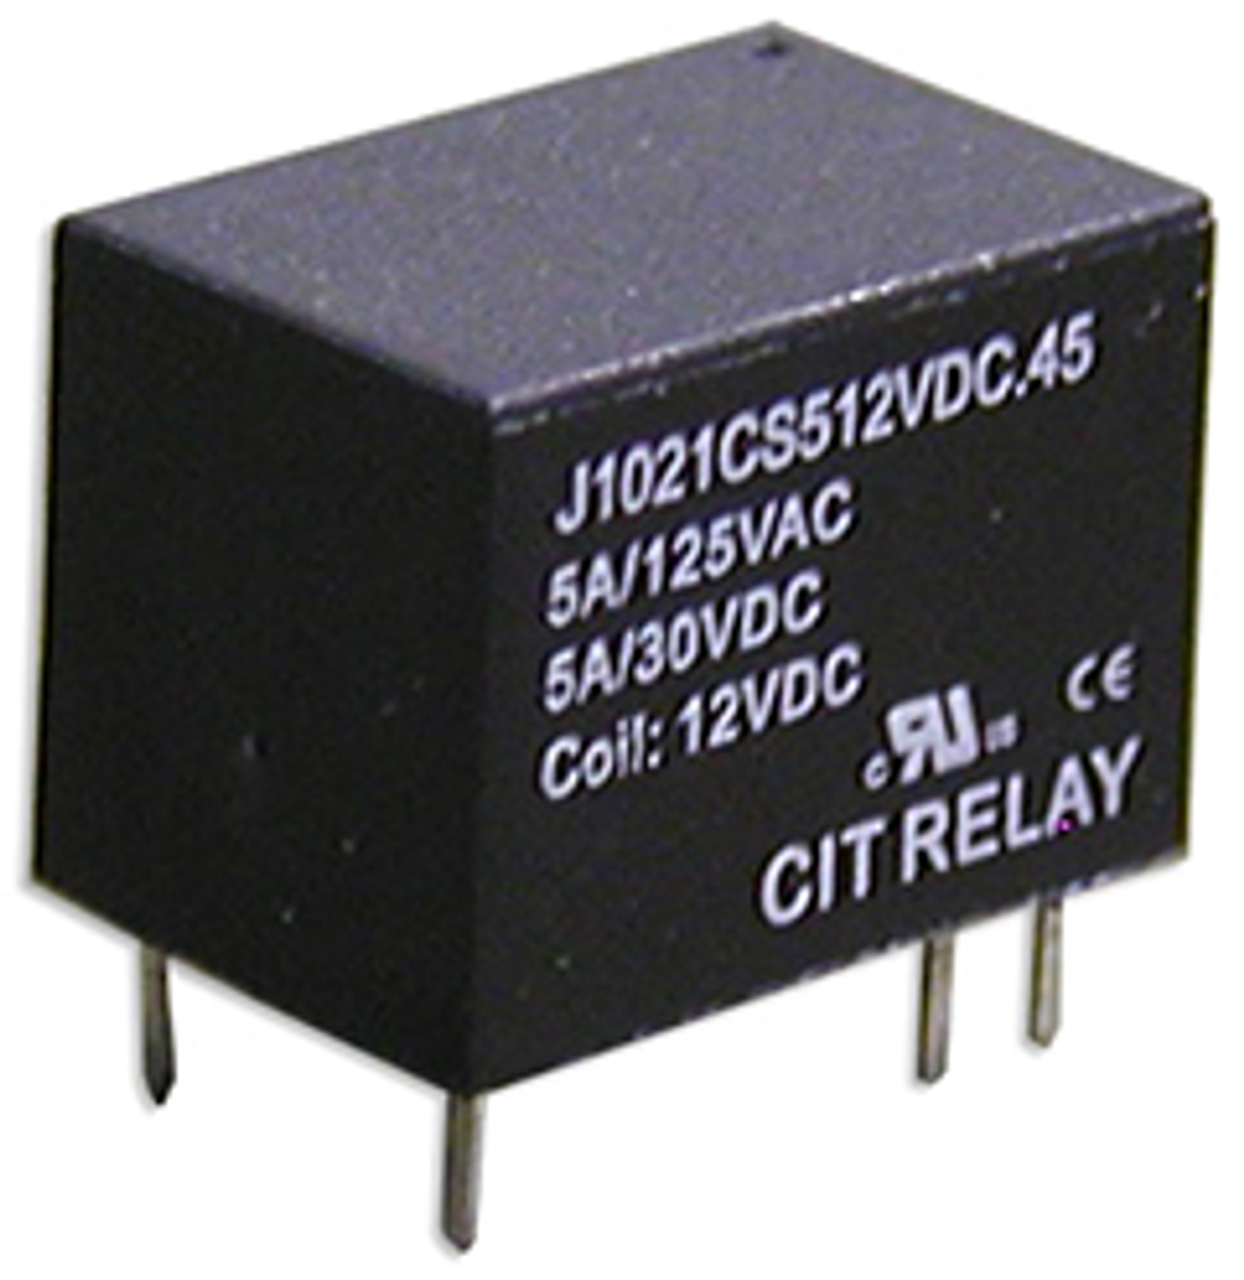 CIT Relay and Switch J1021AS35VDC.20 Power Relays